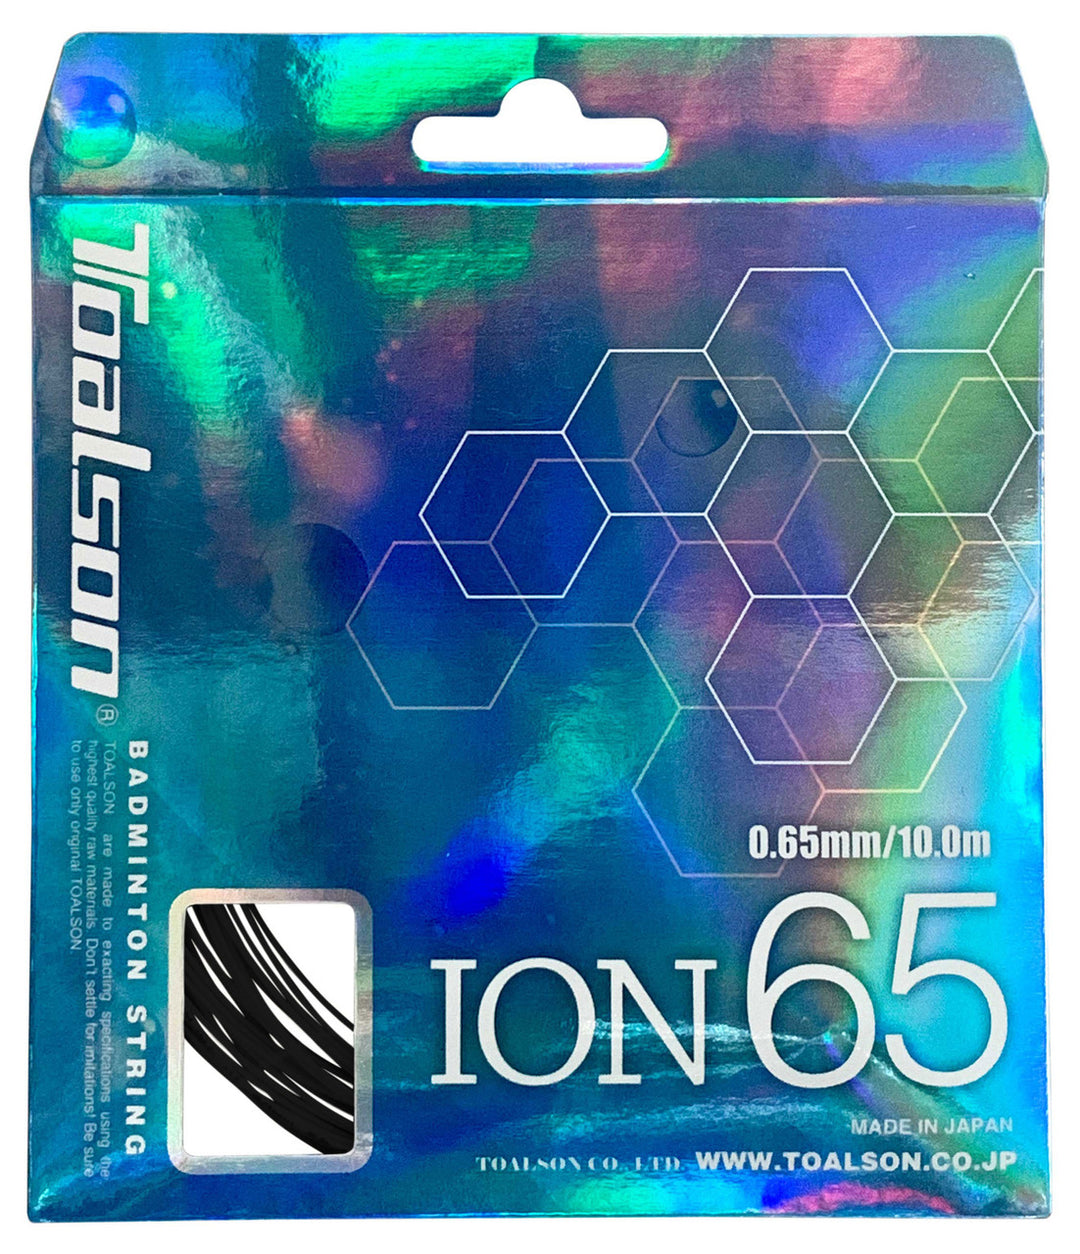 Toalson Ion 65